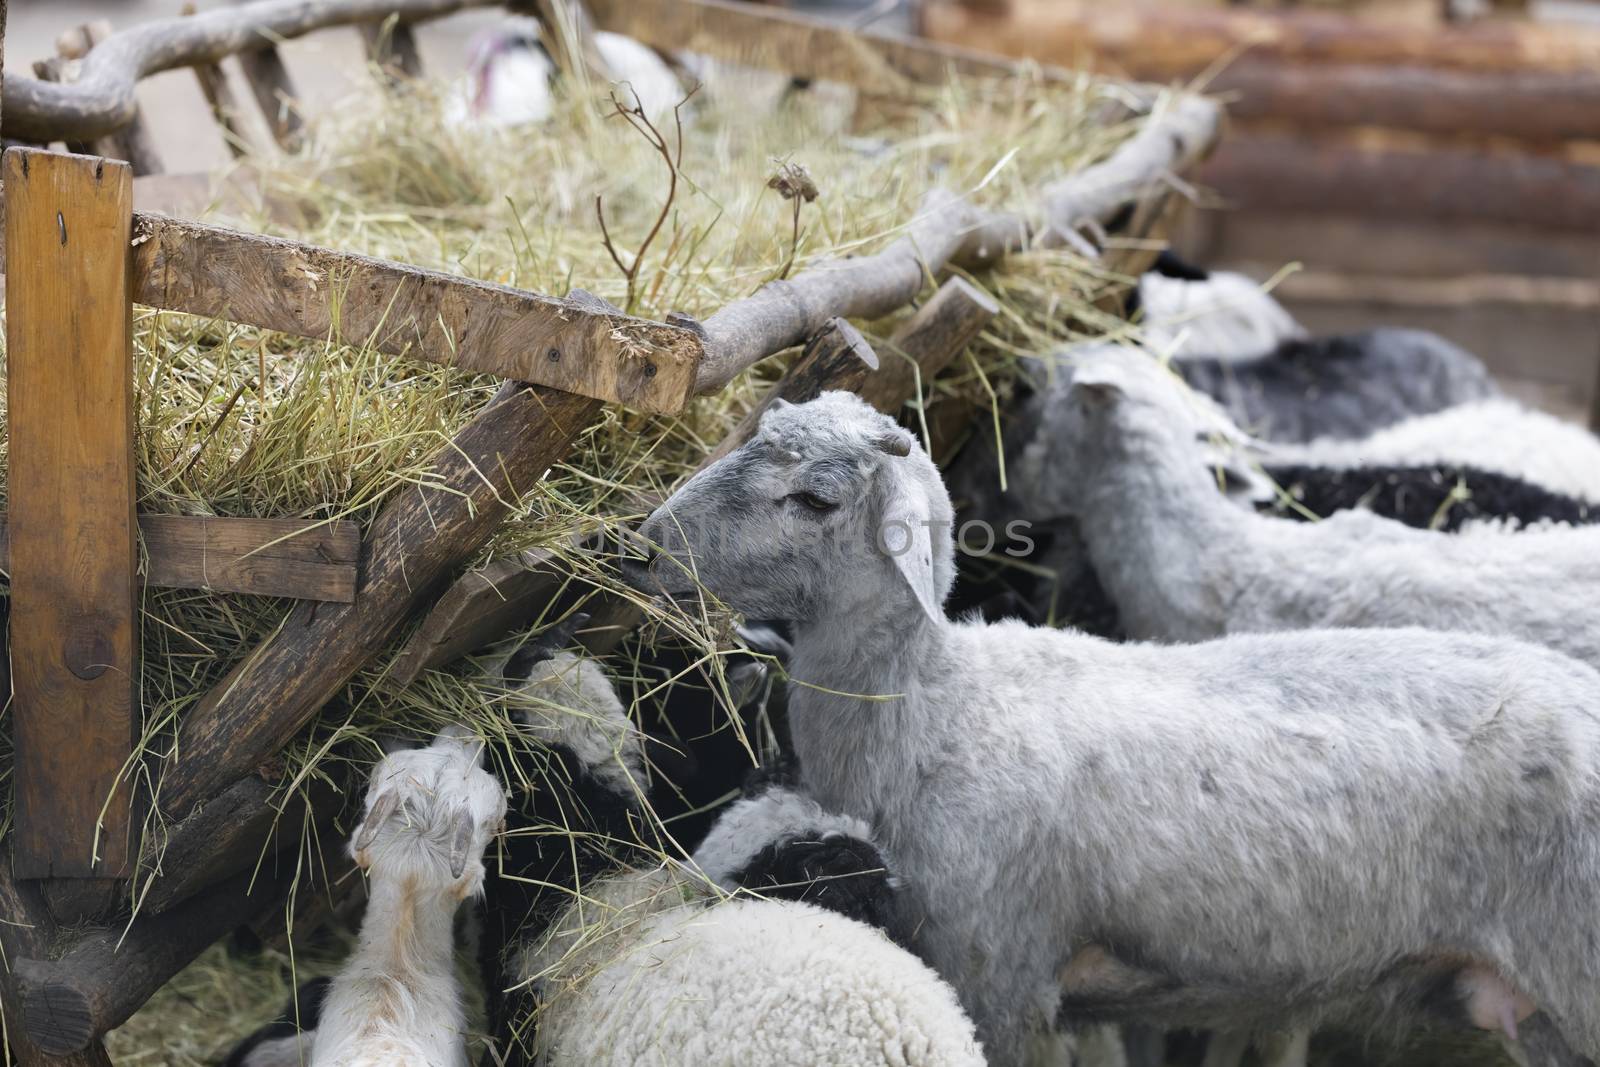 domestic animals sheep and goats eat hay